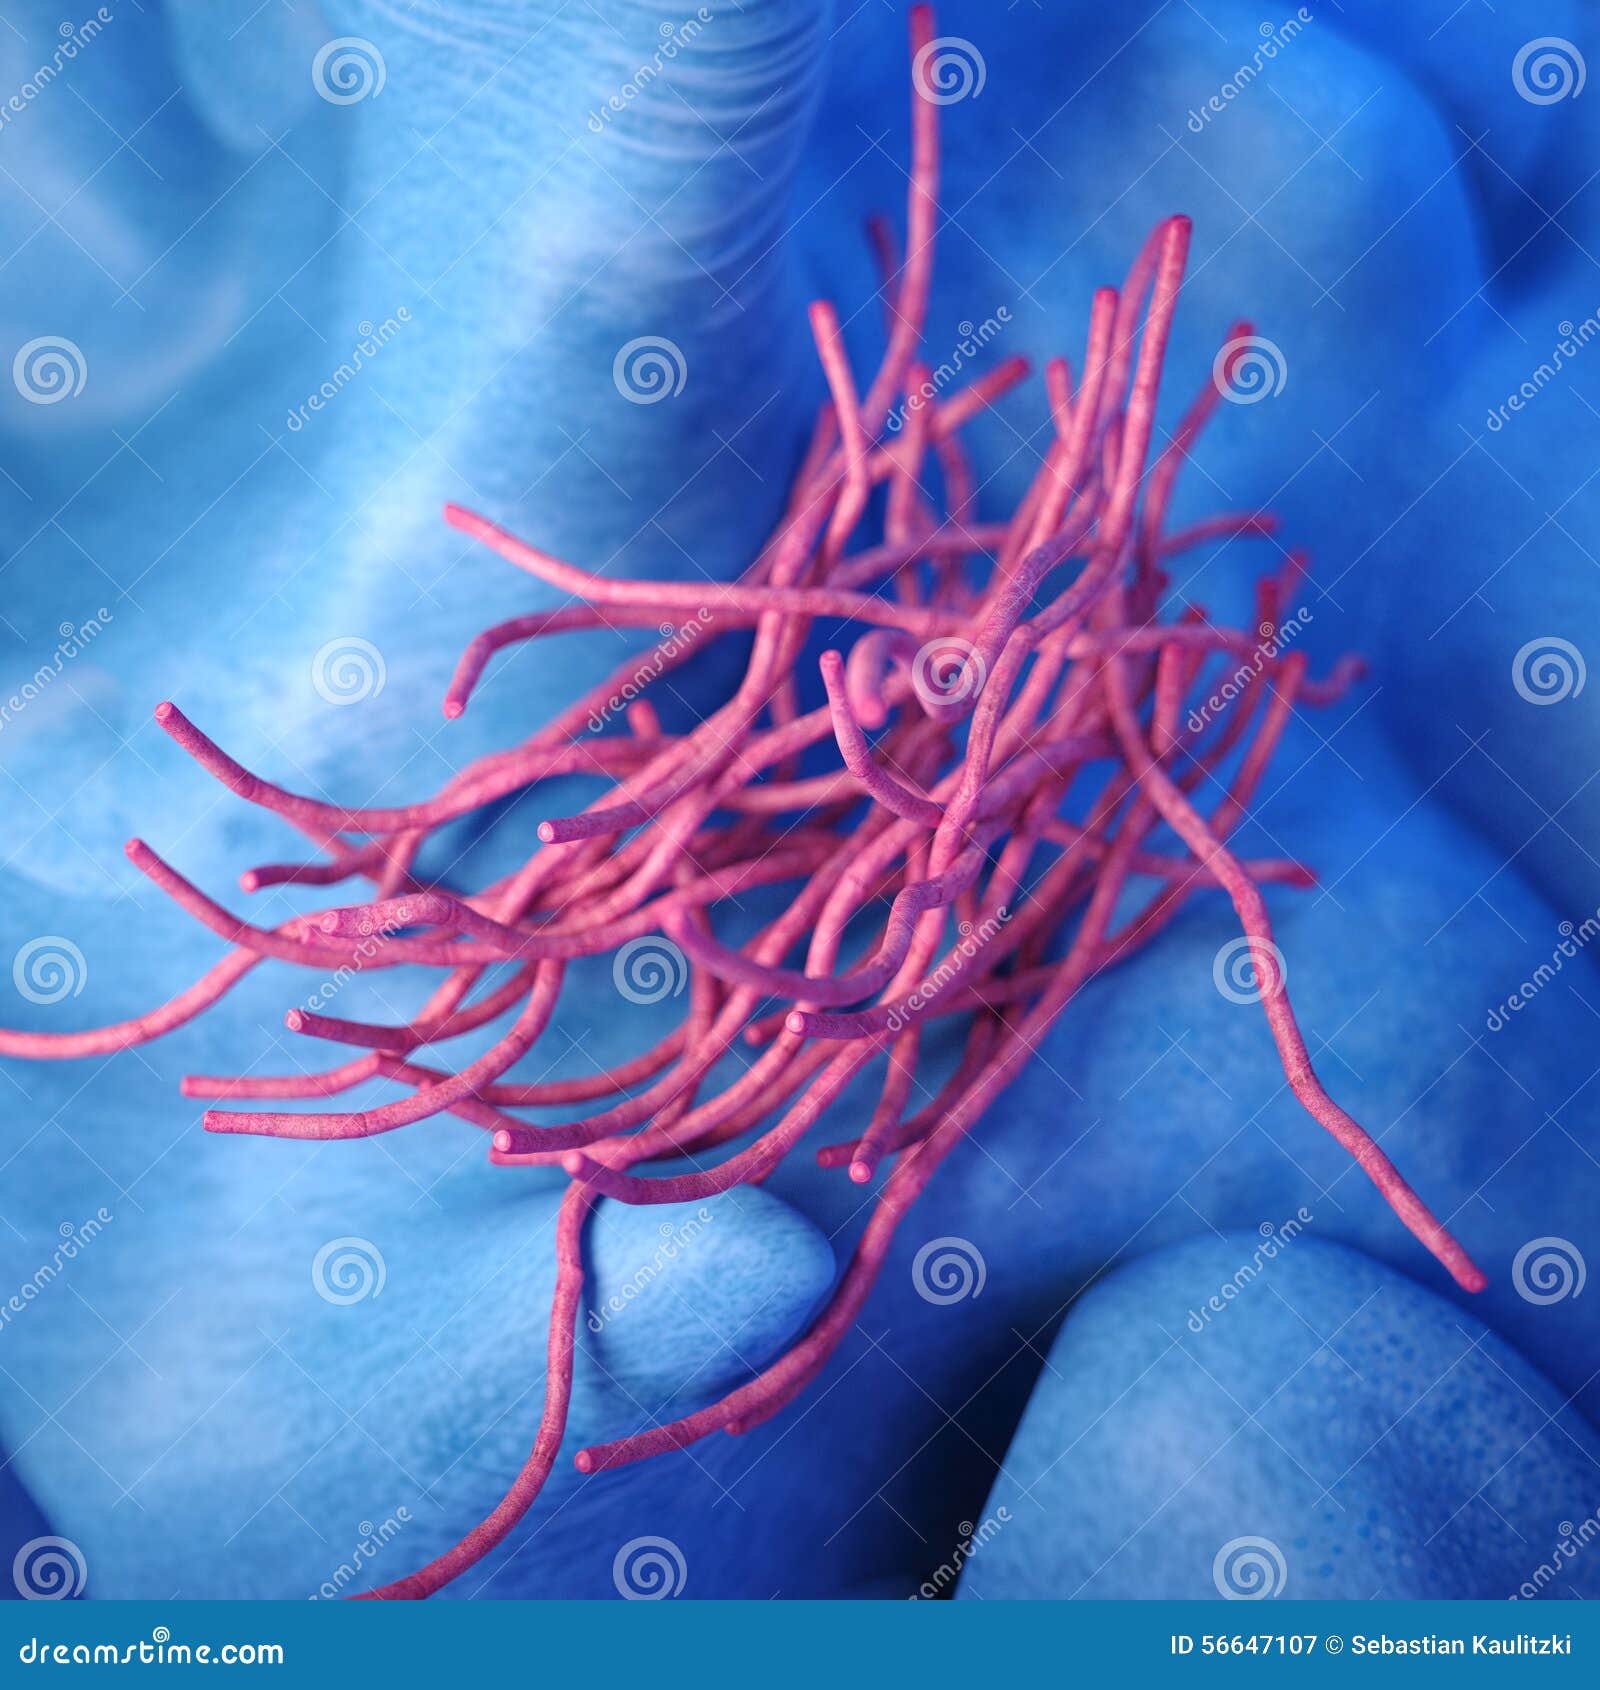 the bacillus anthracis - close up